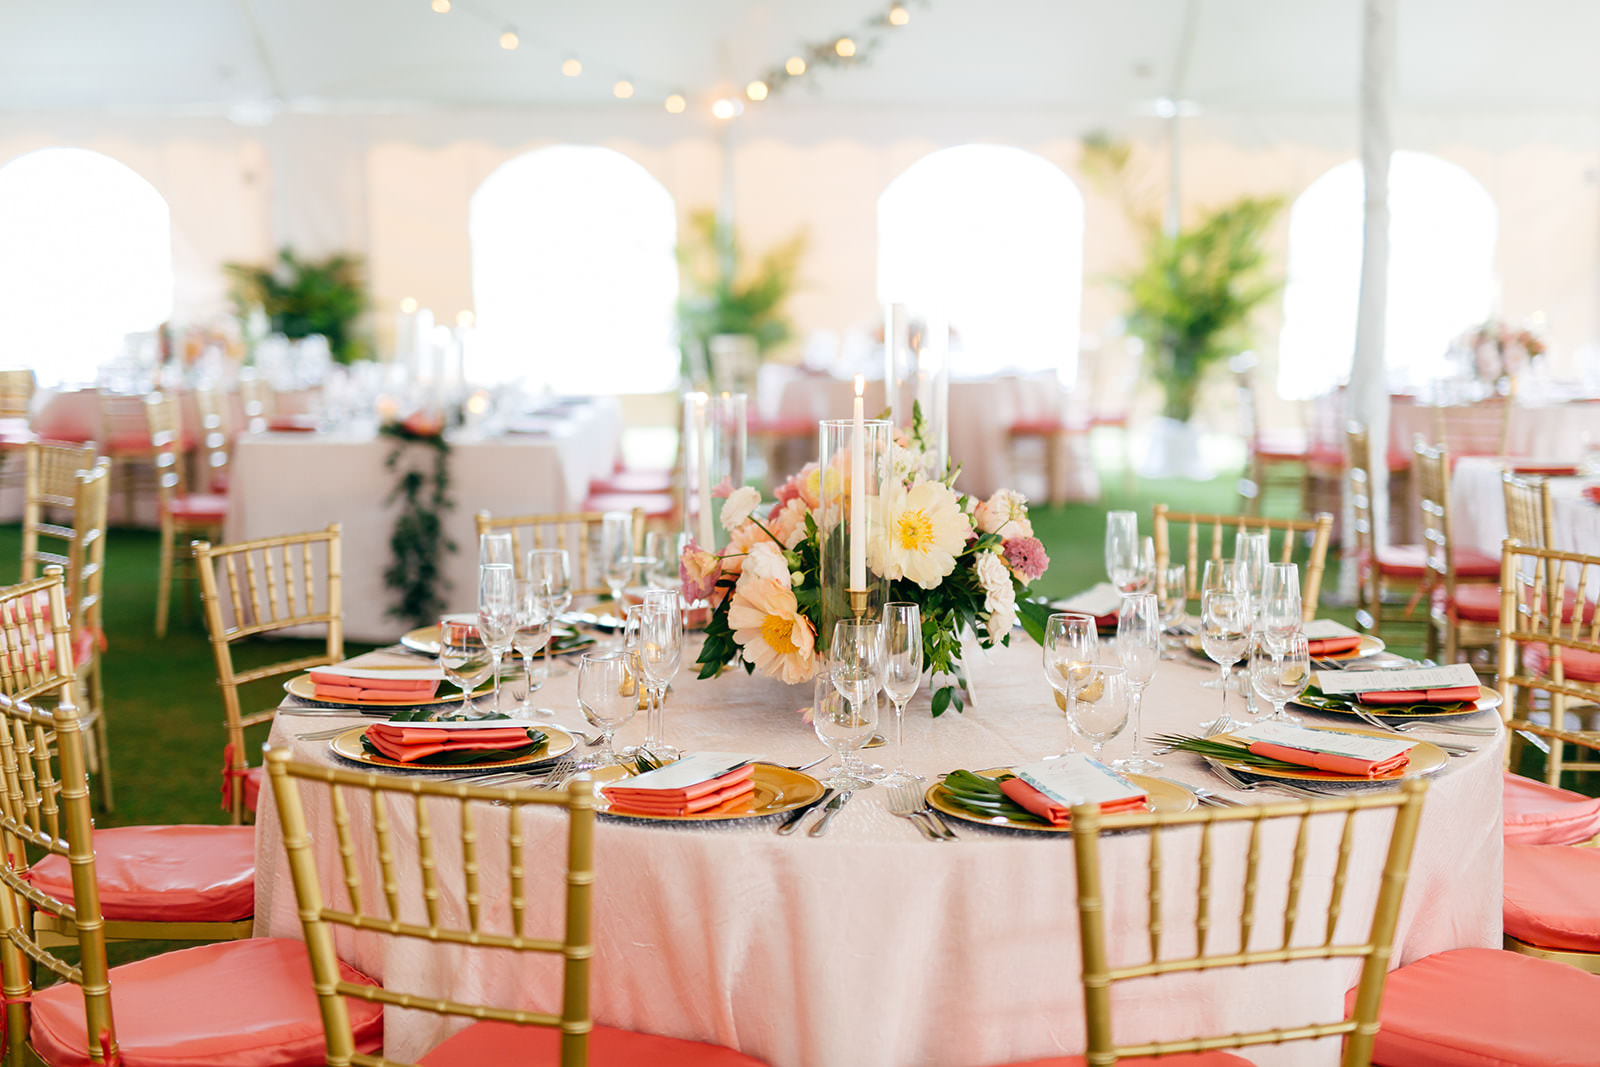 Elegant Tropical Tent Wedding Reception Decor, Round Table with Gold Chargers, Pink Linen Napkin, Colorful Low Floral Centerpieces, Gold Chiavari Chairs with Coral Cushions | Tampa Bay Wedding Planner NK Weddings